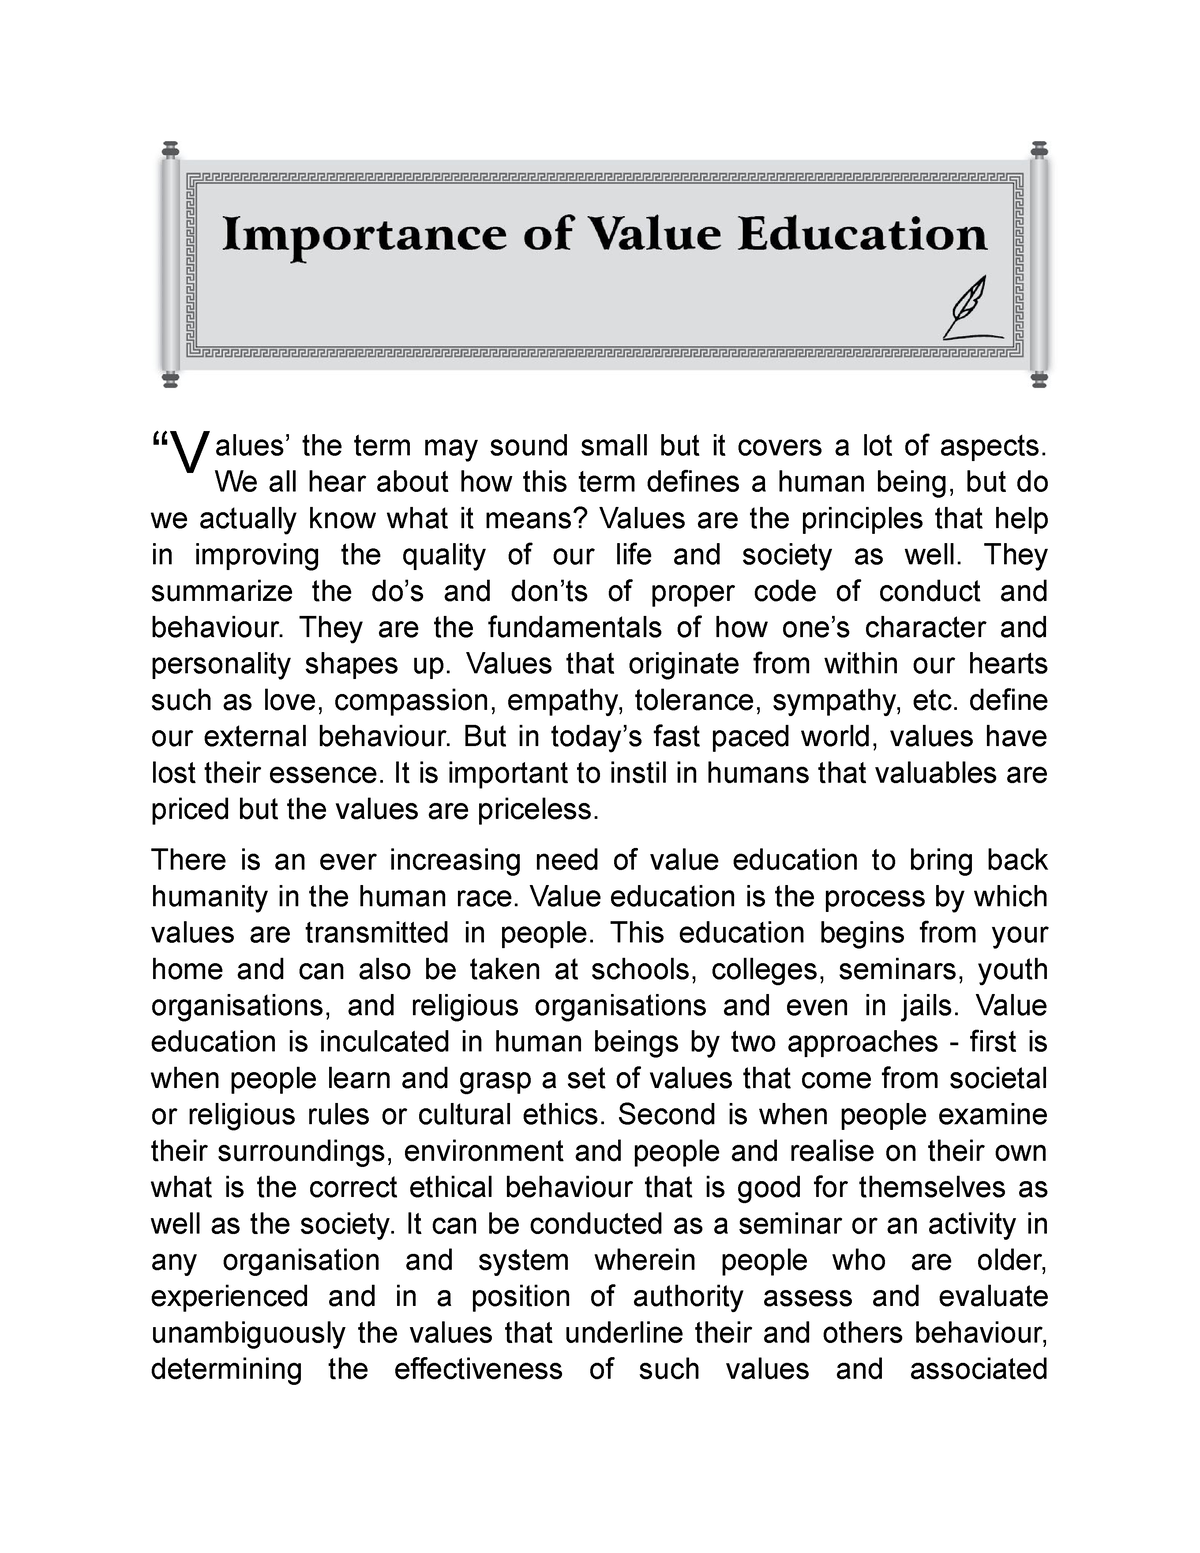 essay of importance of value education